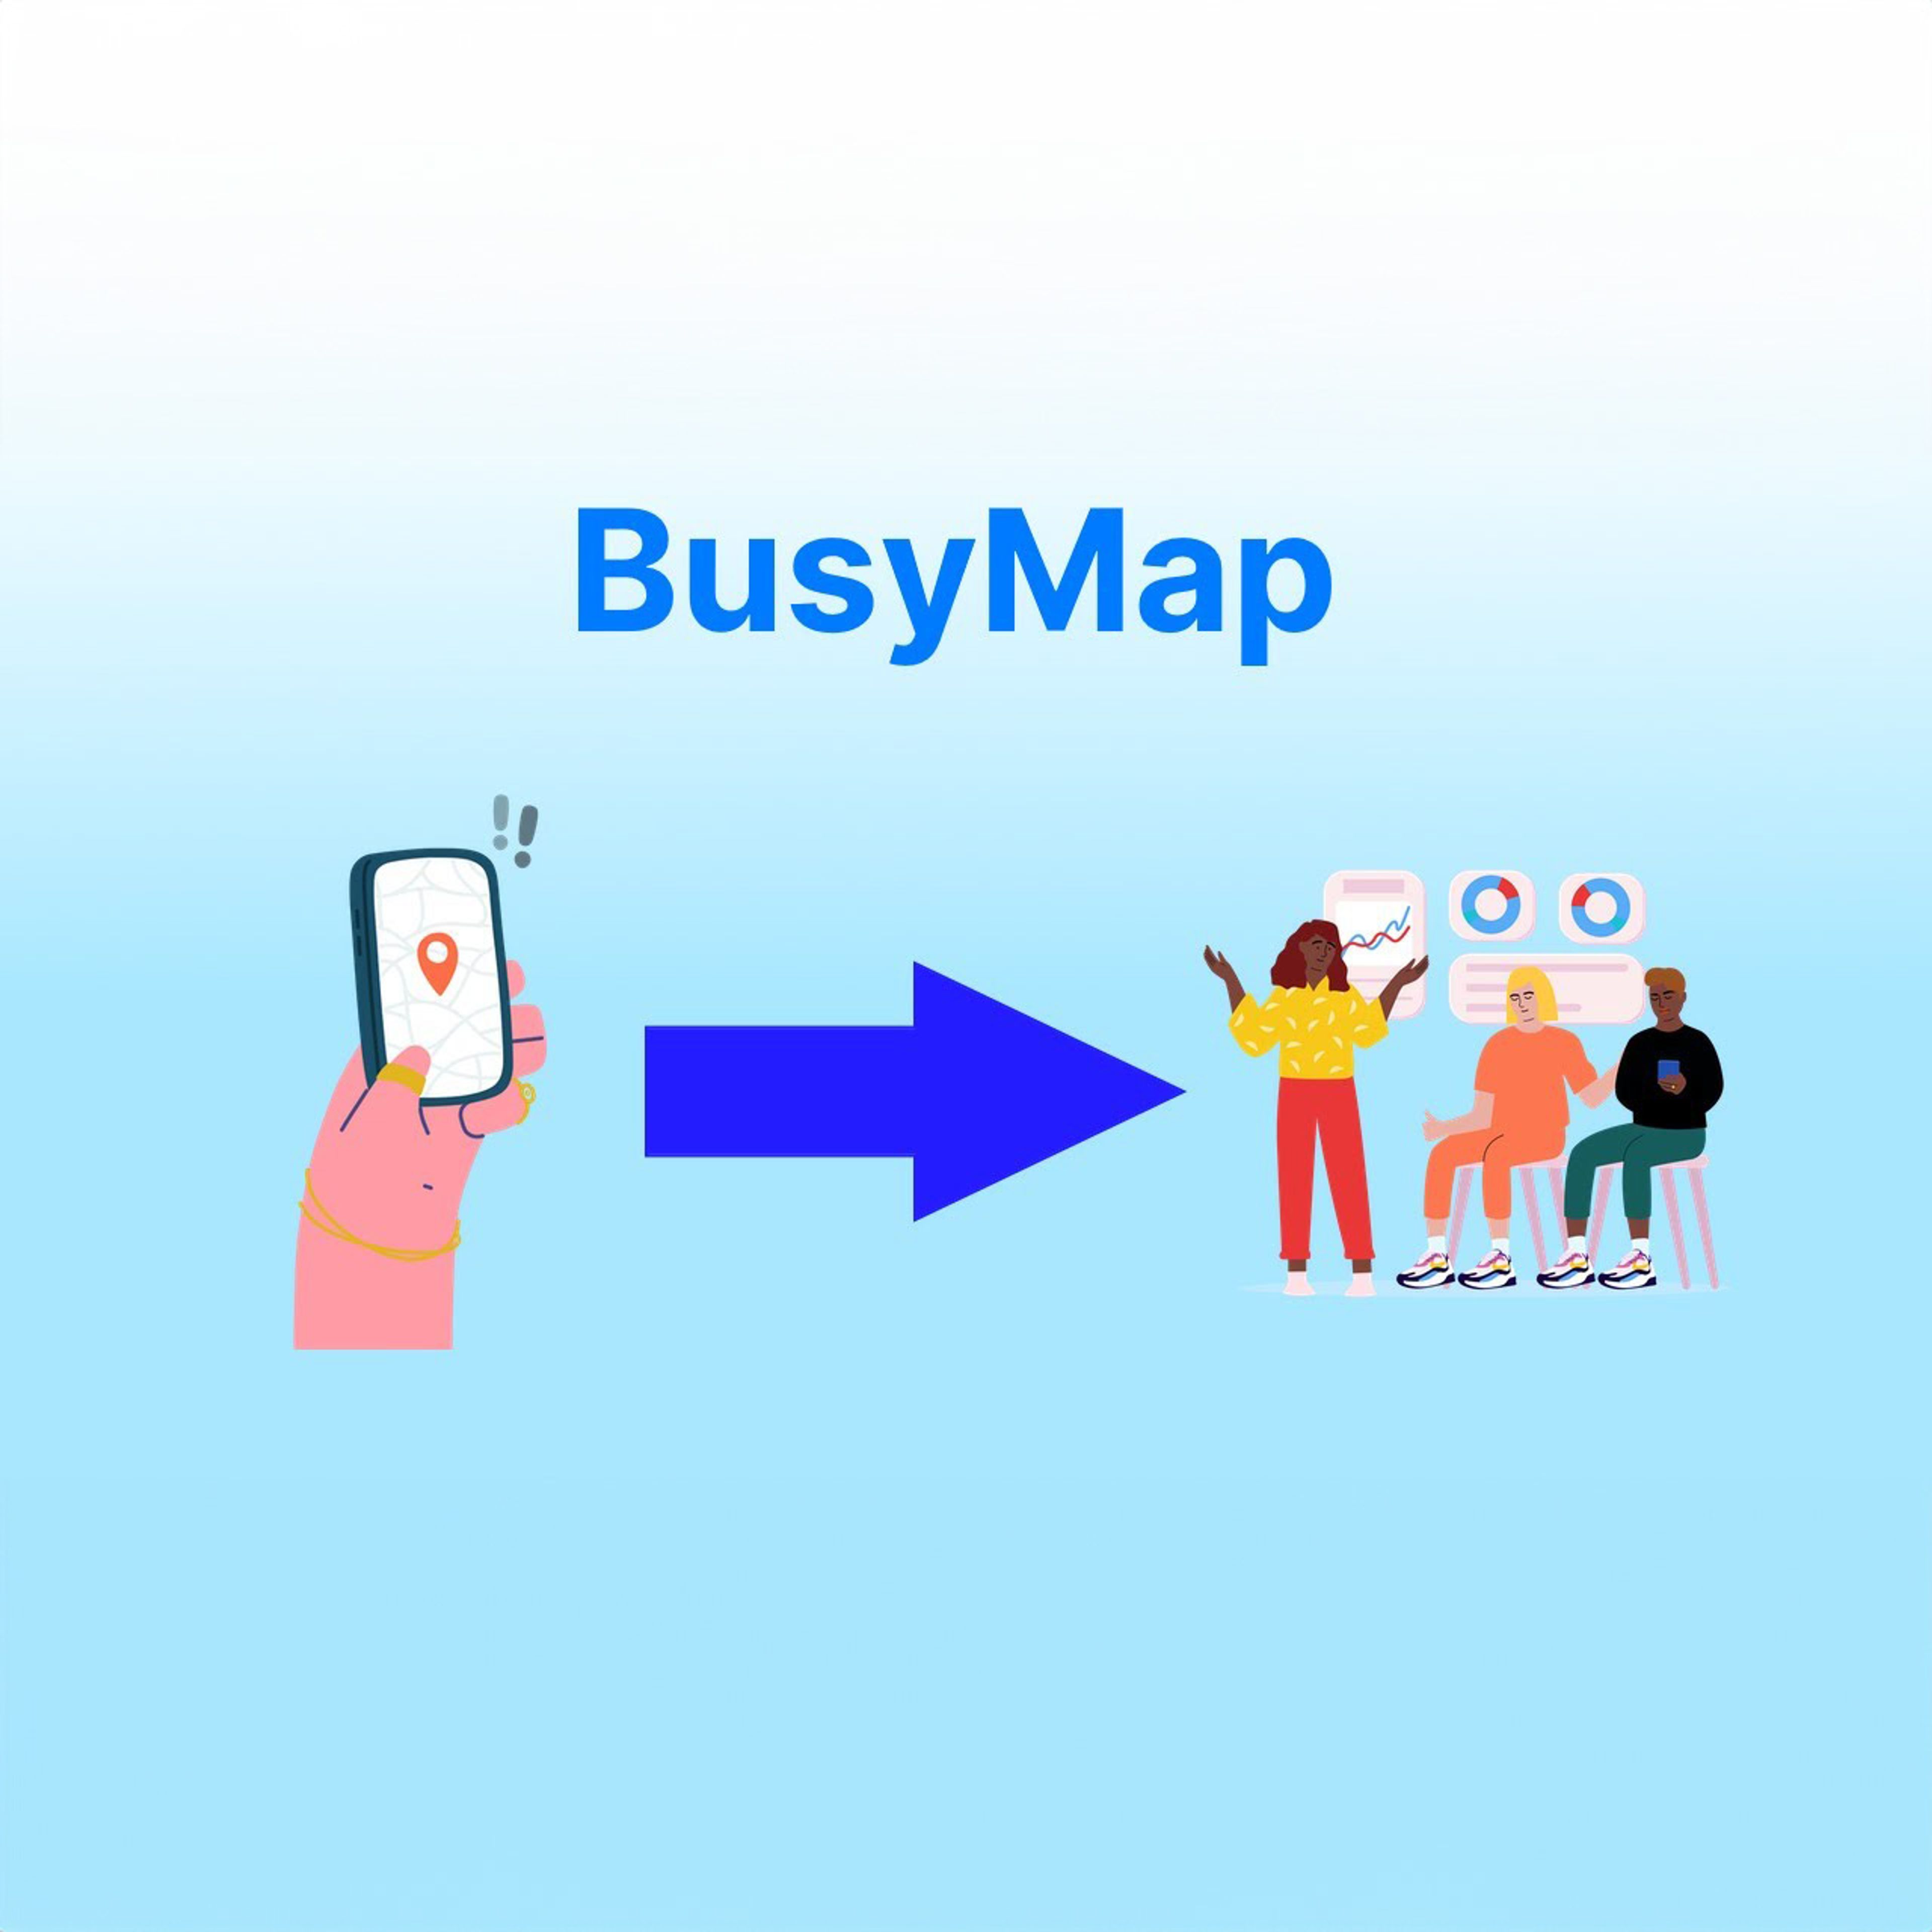 The BusyMap logo, showing an arrow from a smartphone to a group of students interacting. On the left, a hand holds a smartphone with a map pin and notification icon. To the right, a large blue arrow points towards three stylized students engaged in conversation. Above, the title "BusyMap" is prominently displayed in bold lettering. The background is a light blue gradient.